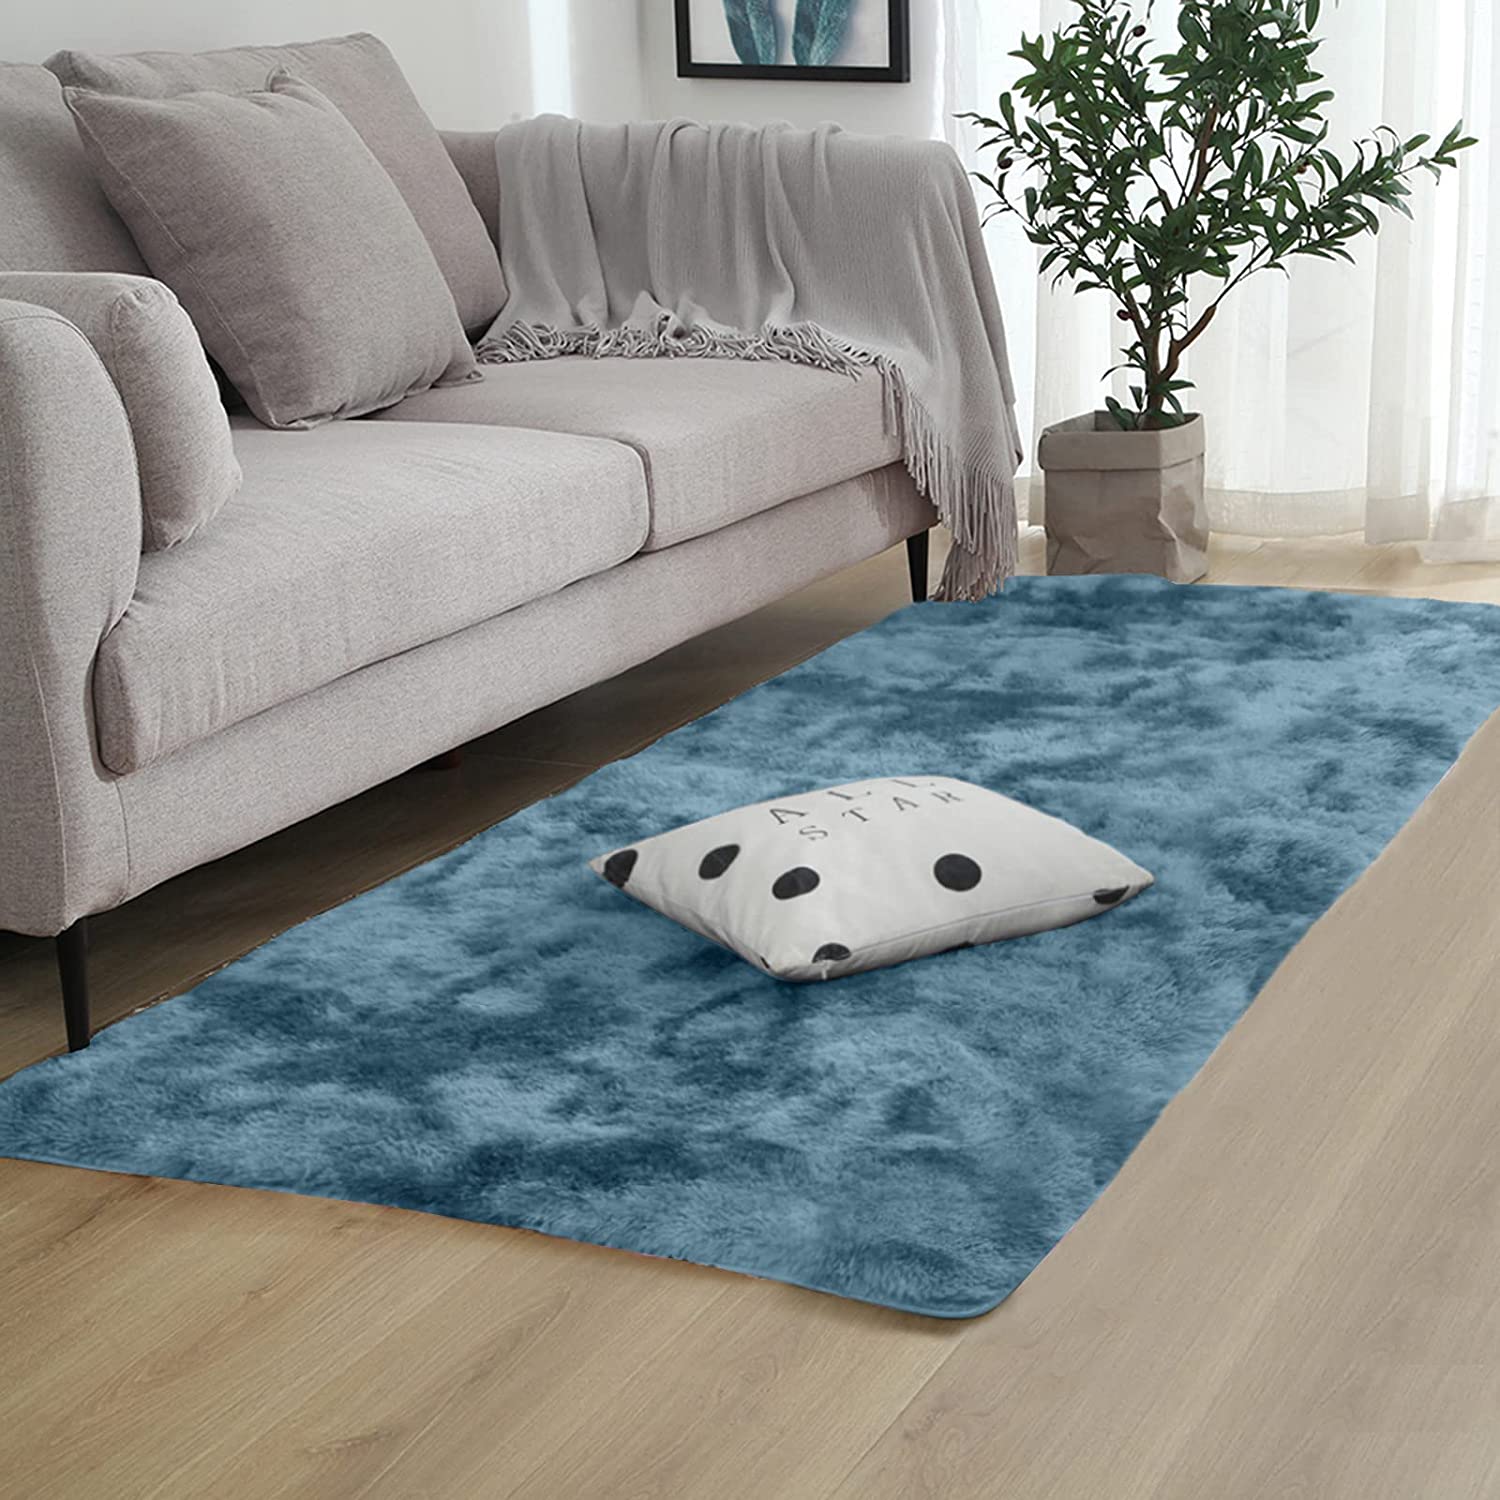 Details about   Shag Loomed Area Rug for Kids Play Room Warm Soft Faux Fur Luxury Rug Plush Thro 